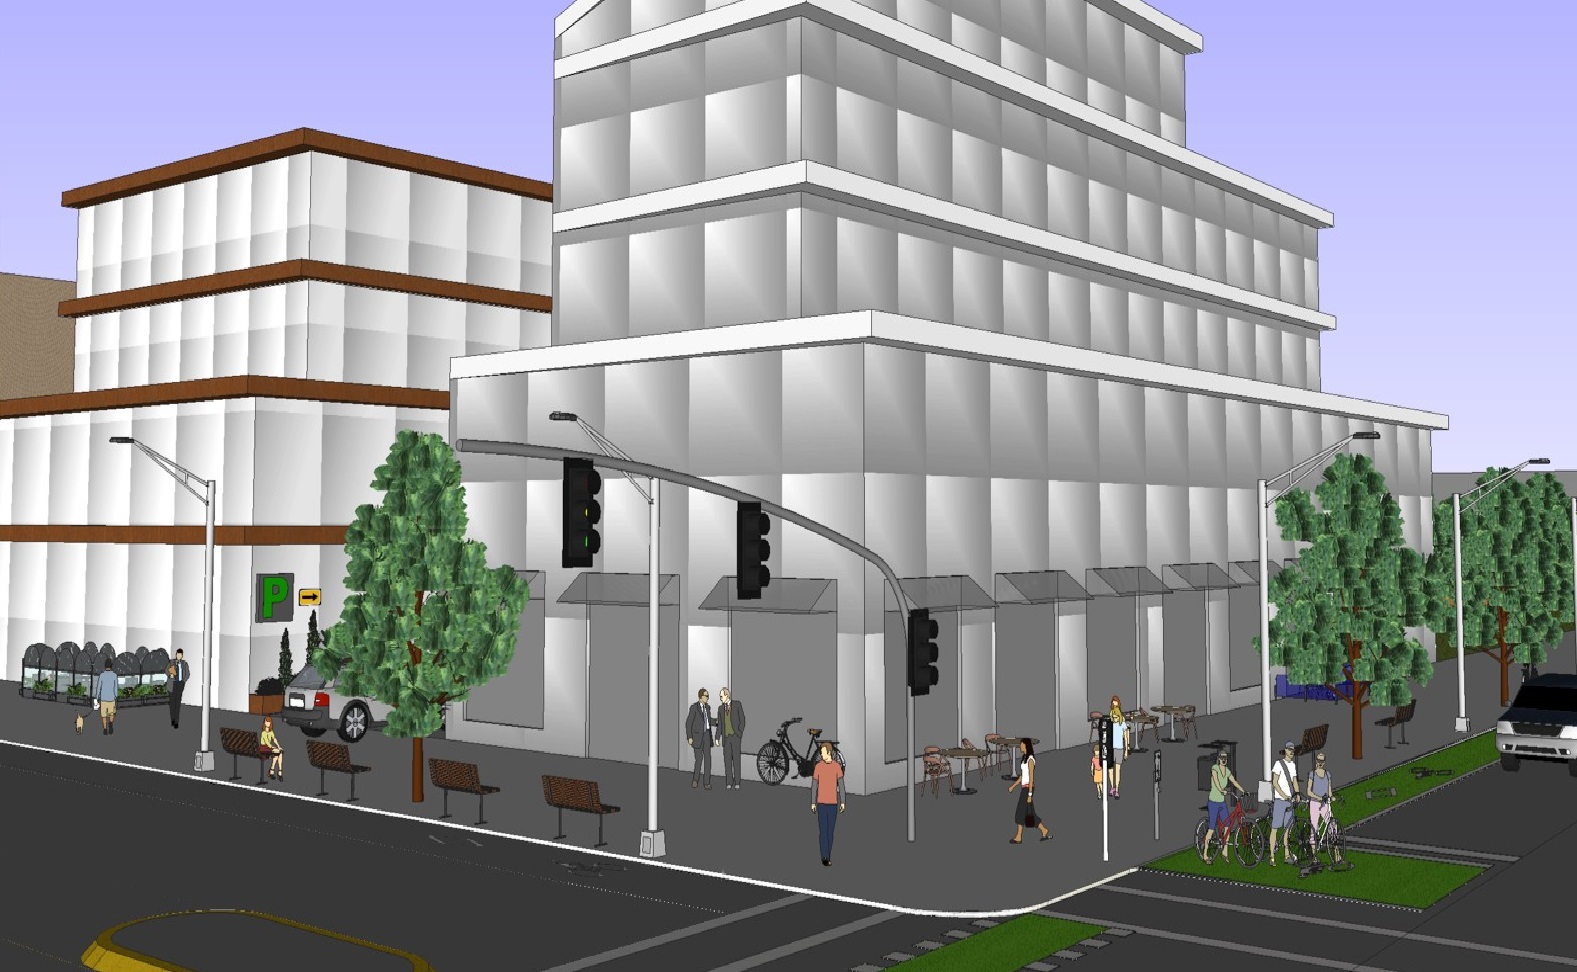 Image of streetscape showing matters that may be addressed as part of site plan control including access for pedestrians and vehicles, walkways, lighting, landscaping, and exterior design.